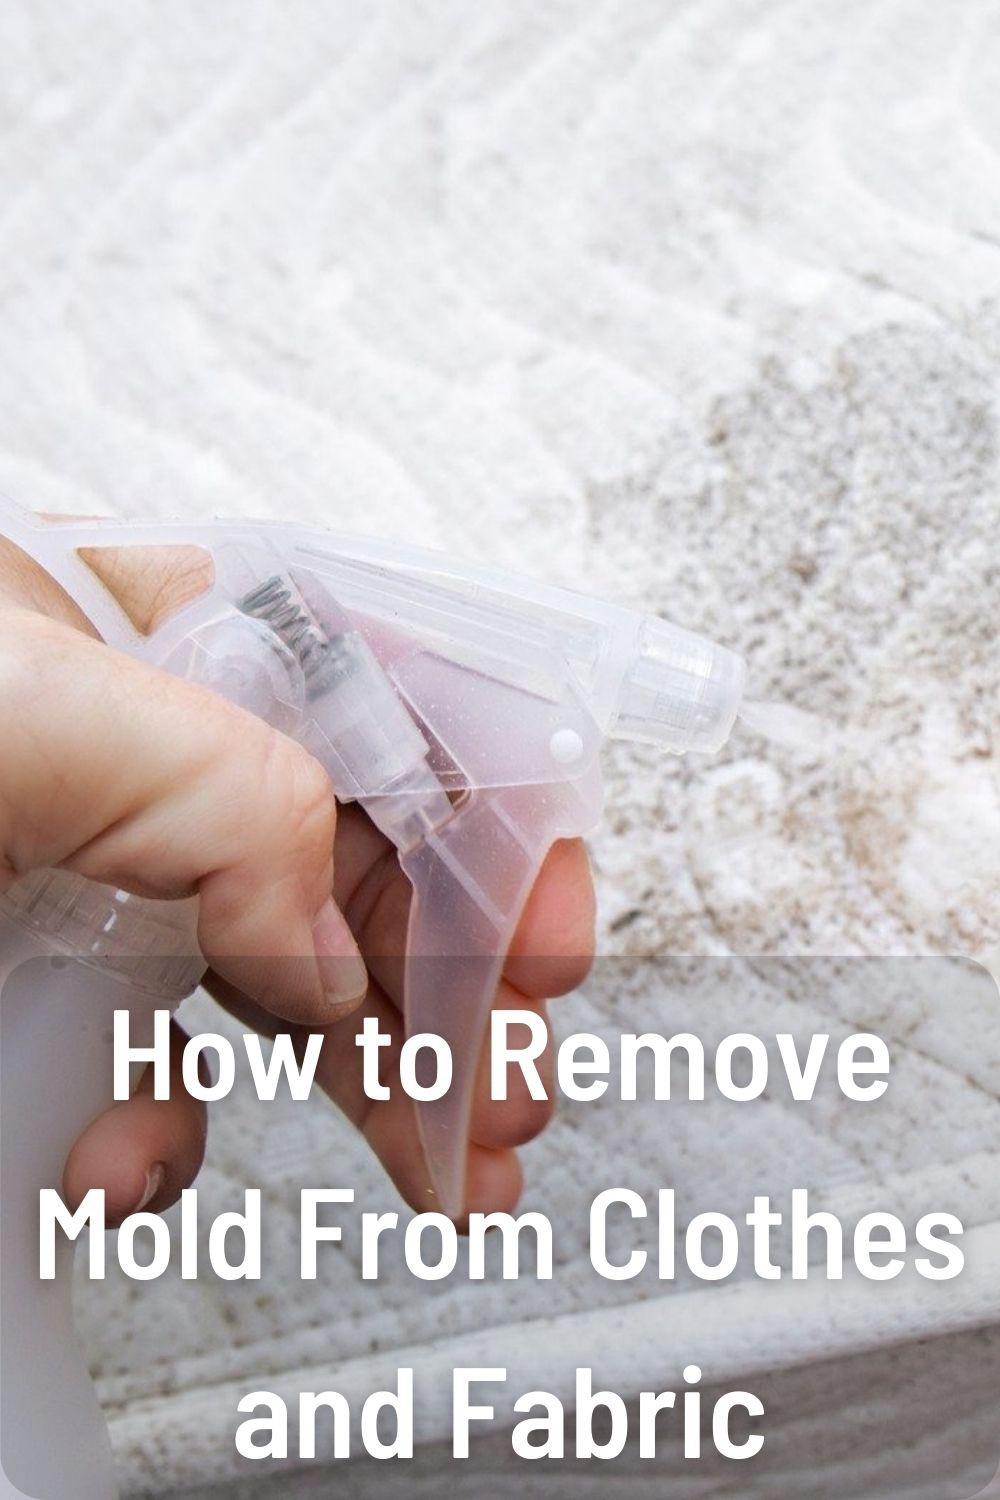 How to Remove Mold From Clothes and Fabric